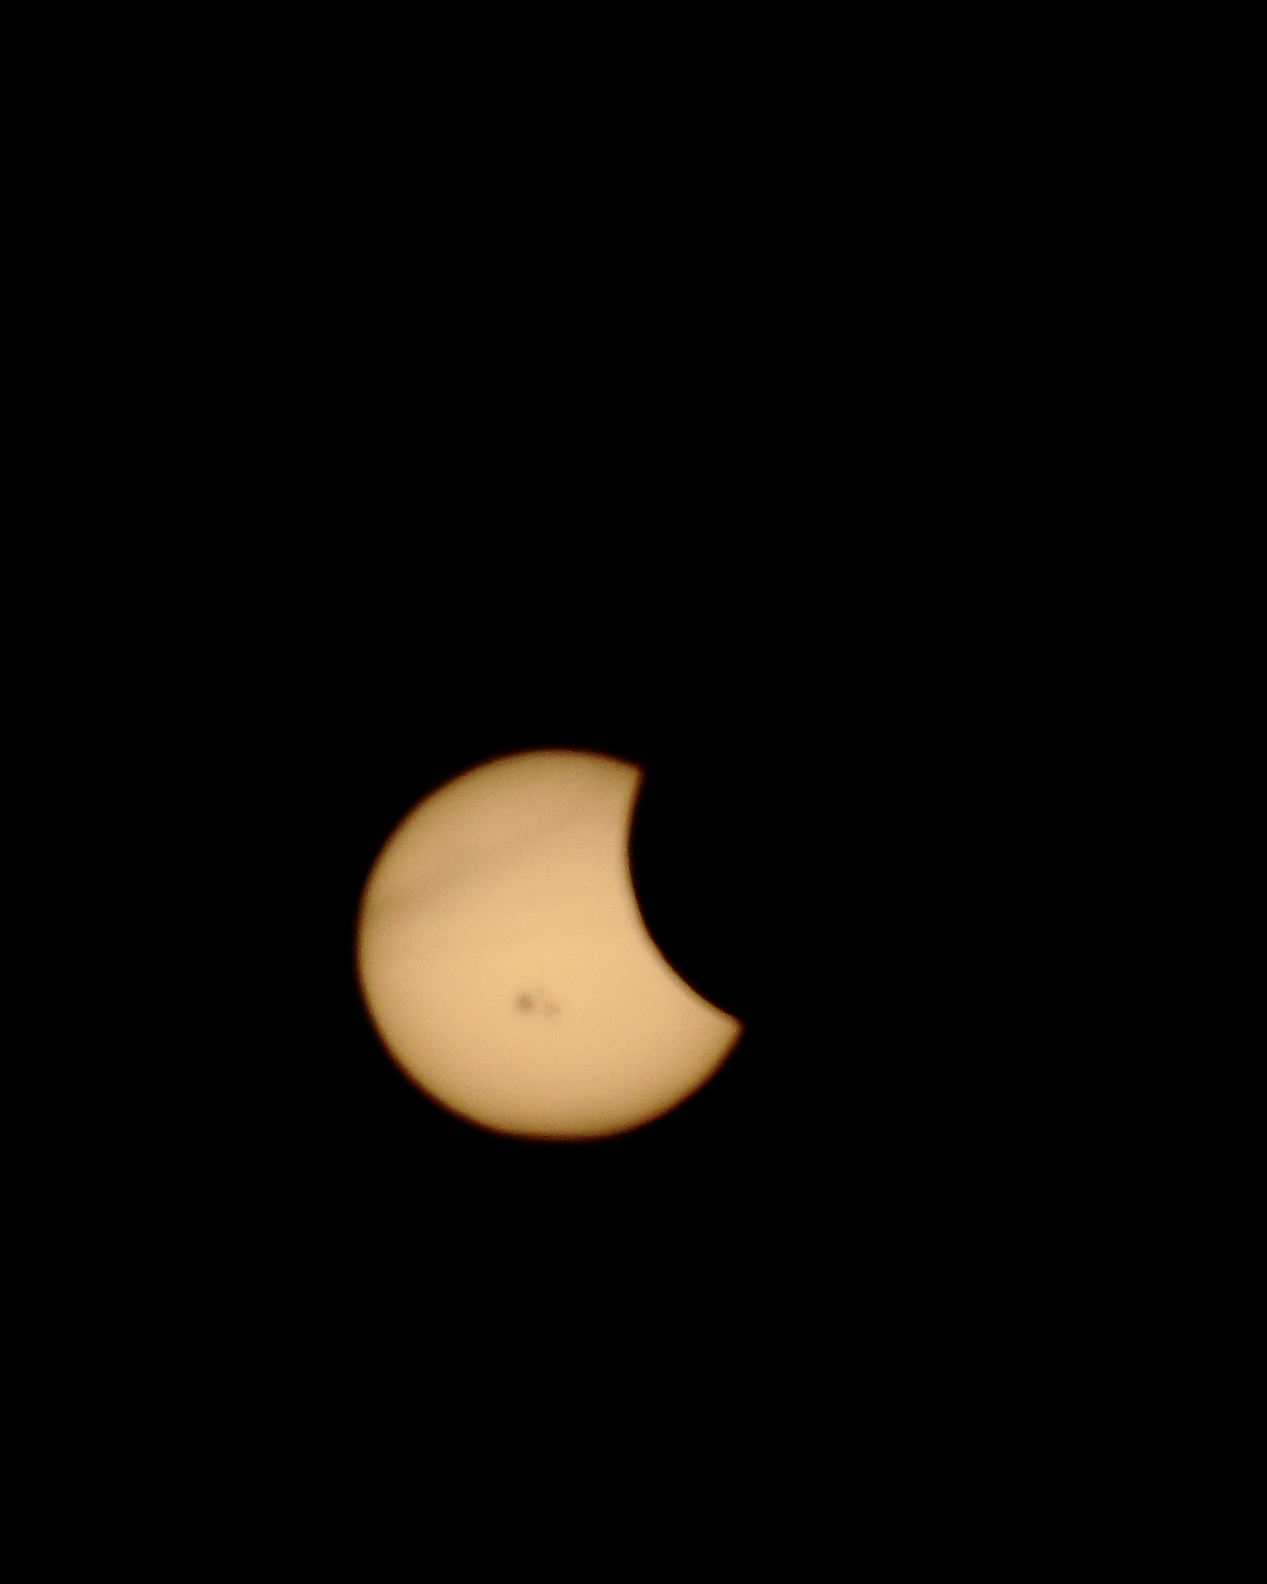 October 23, 2014 - Partial eclipse of the sun.